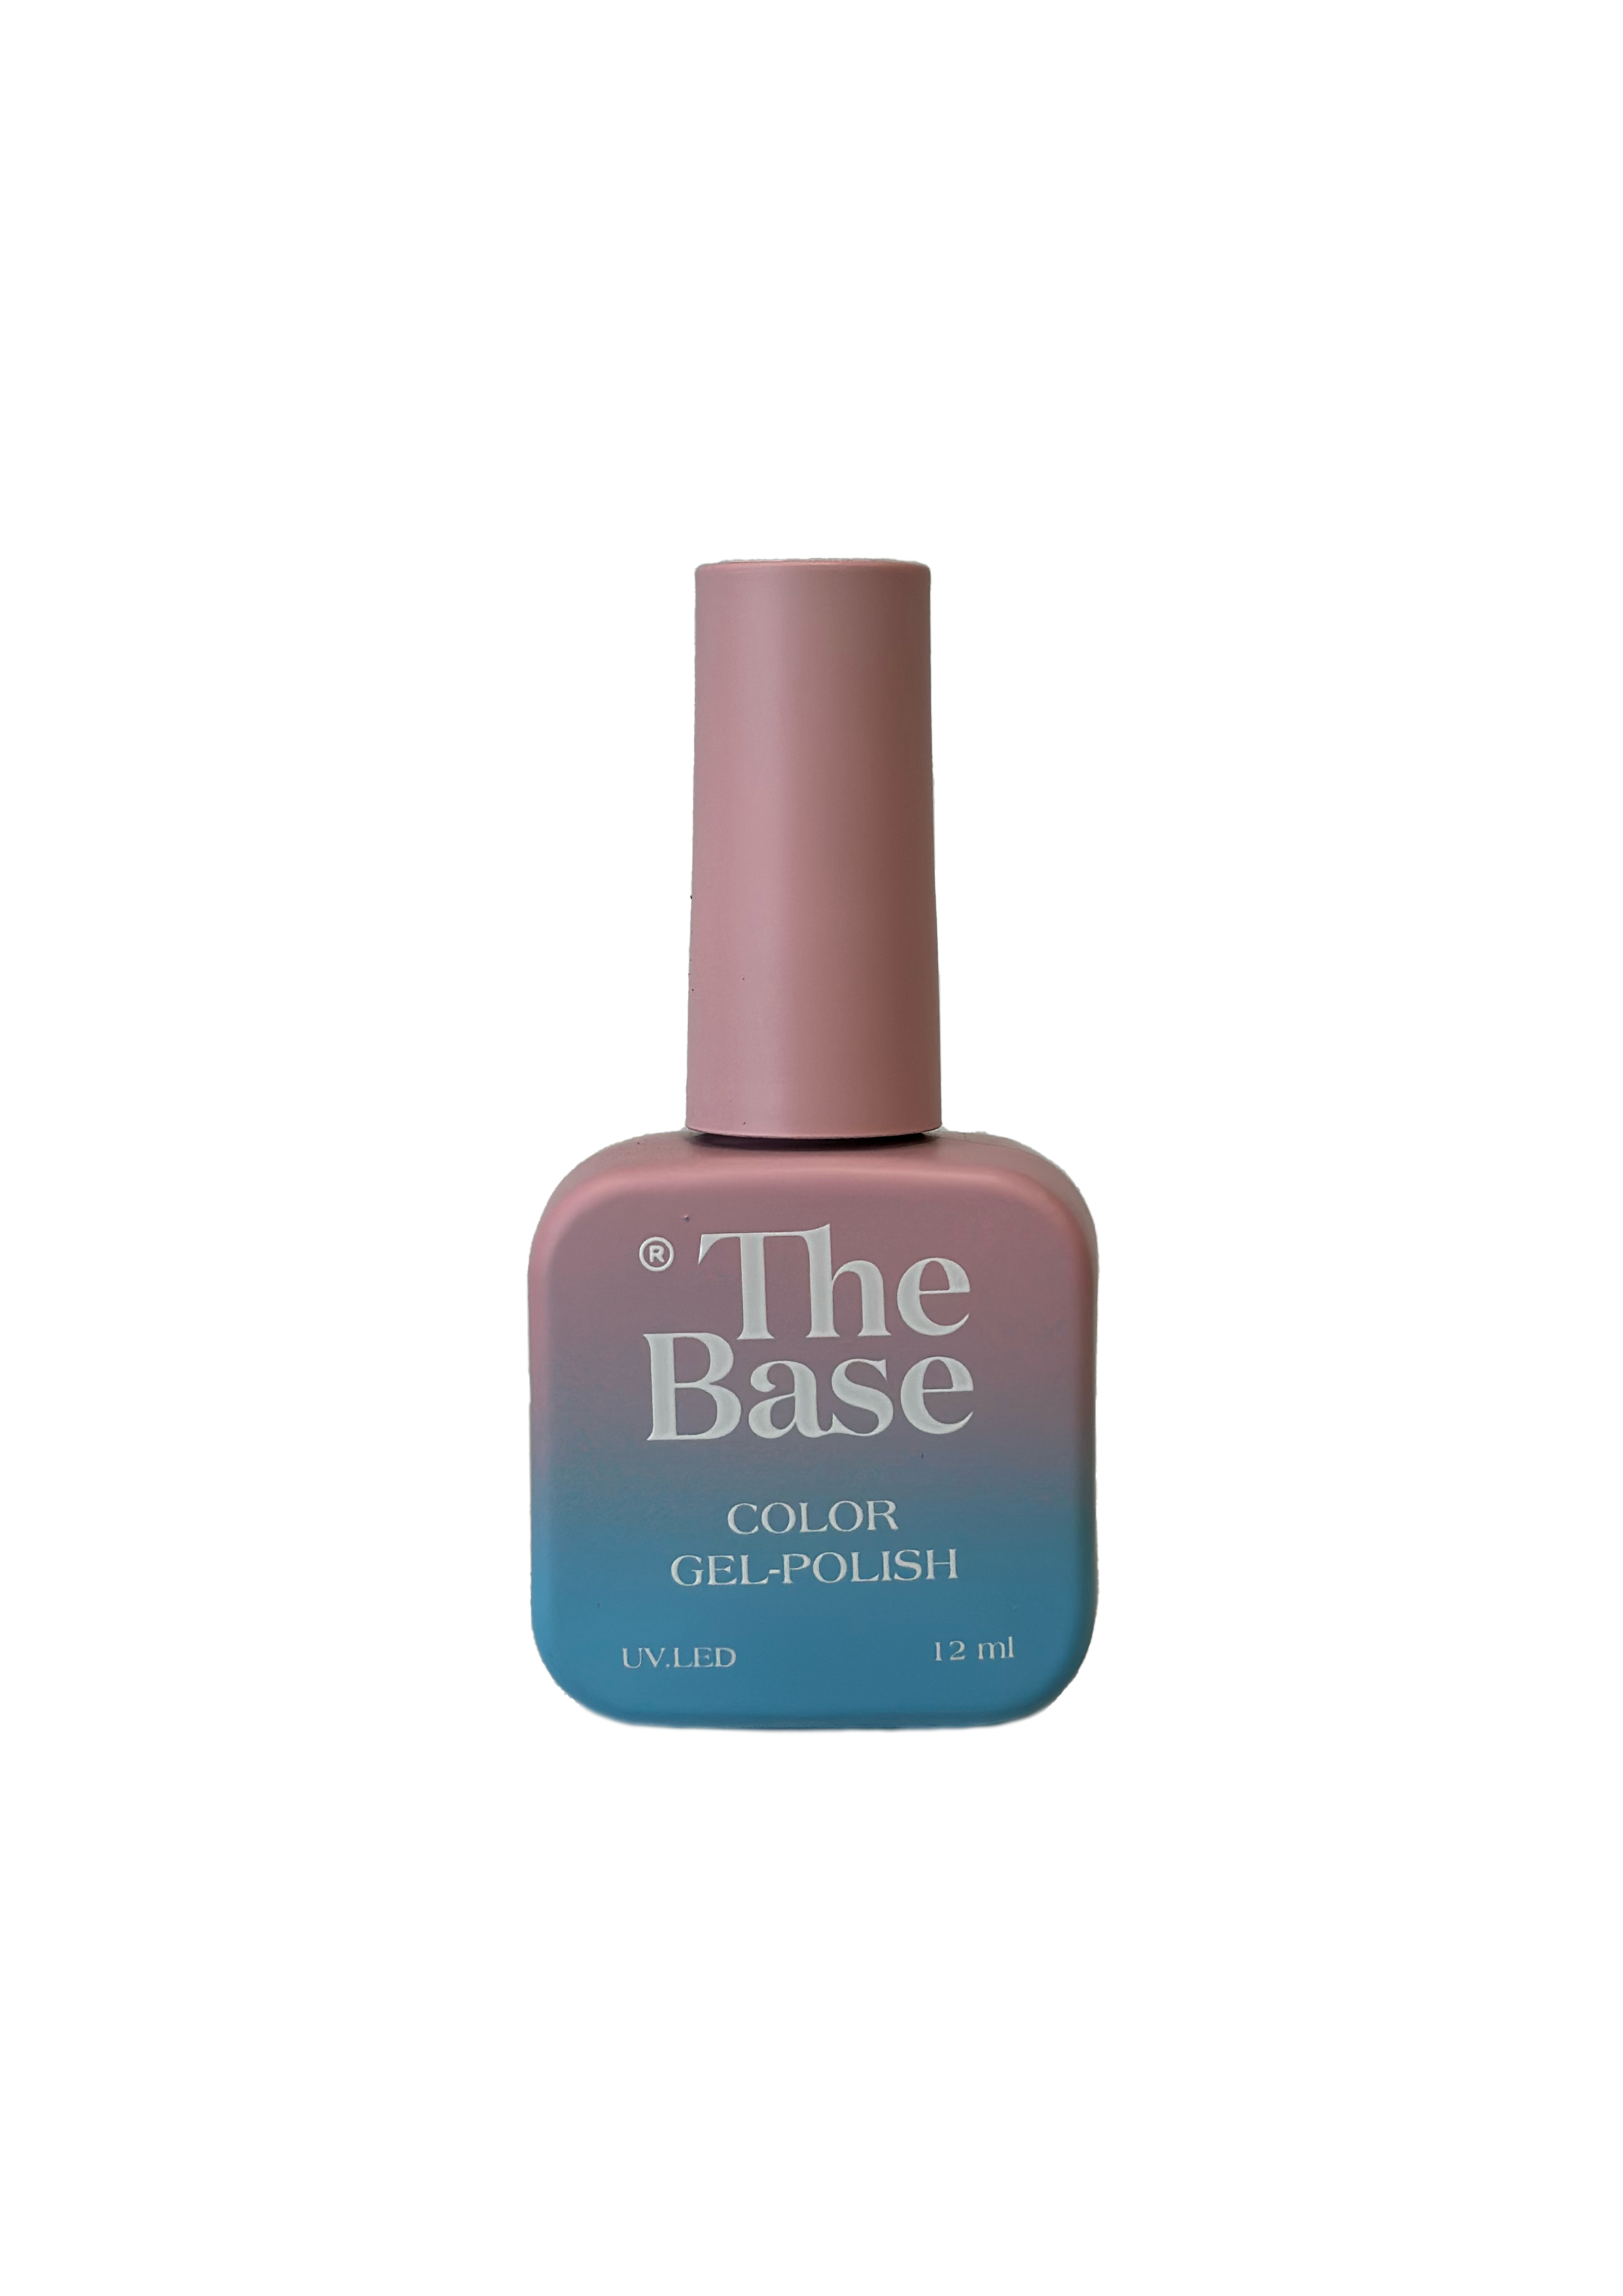 Vernis semi permanent The Base camouflage 4